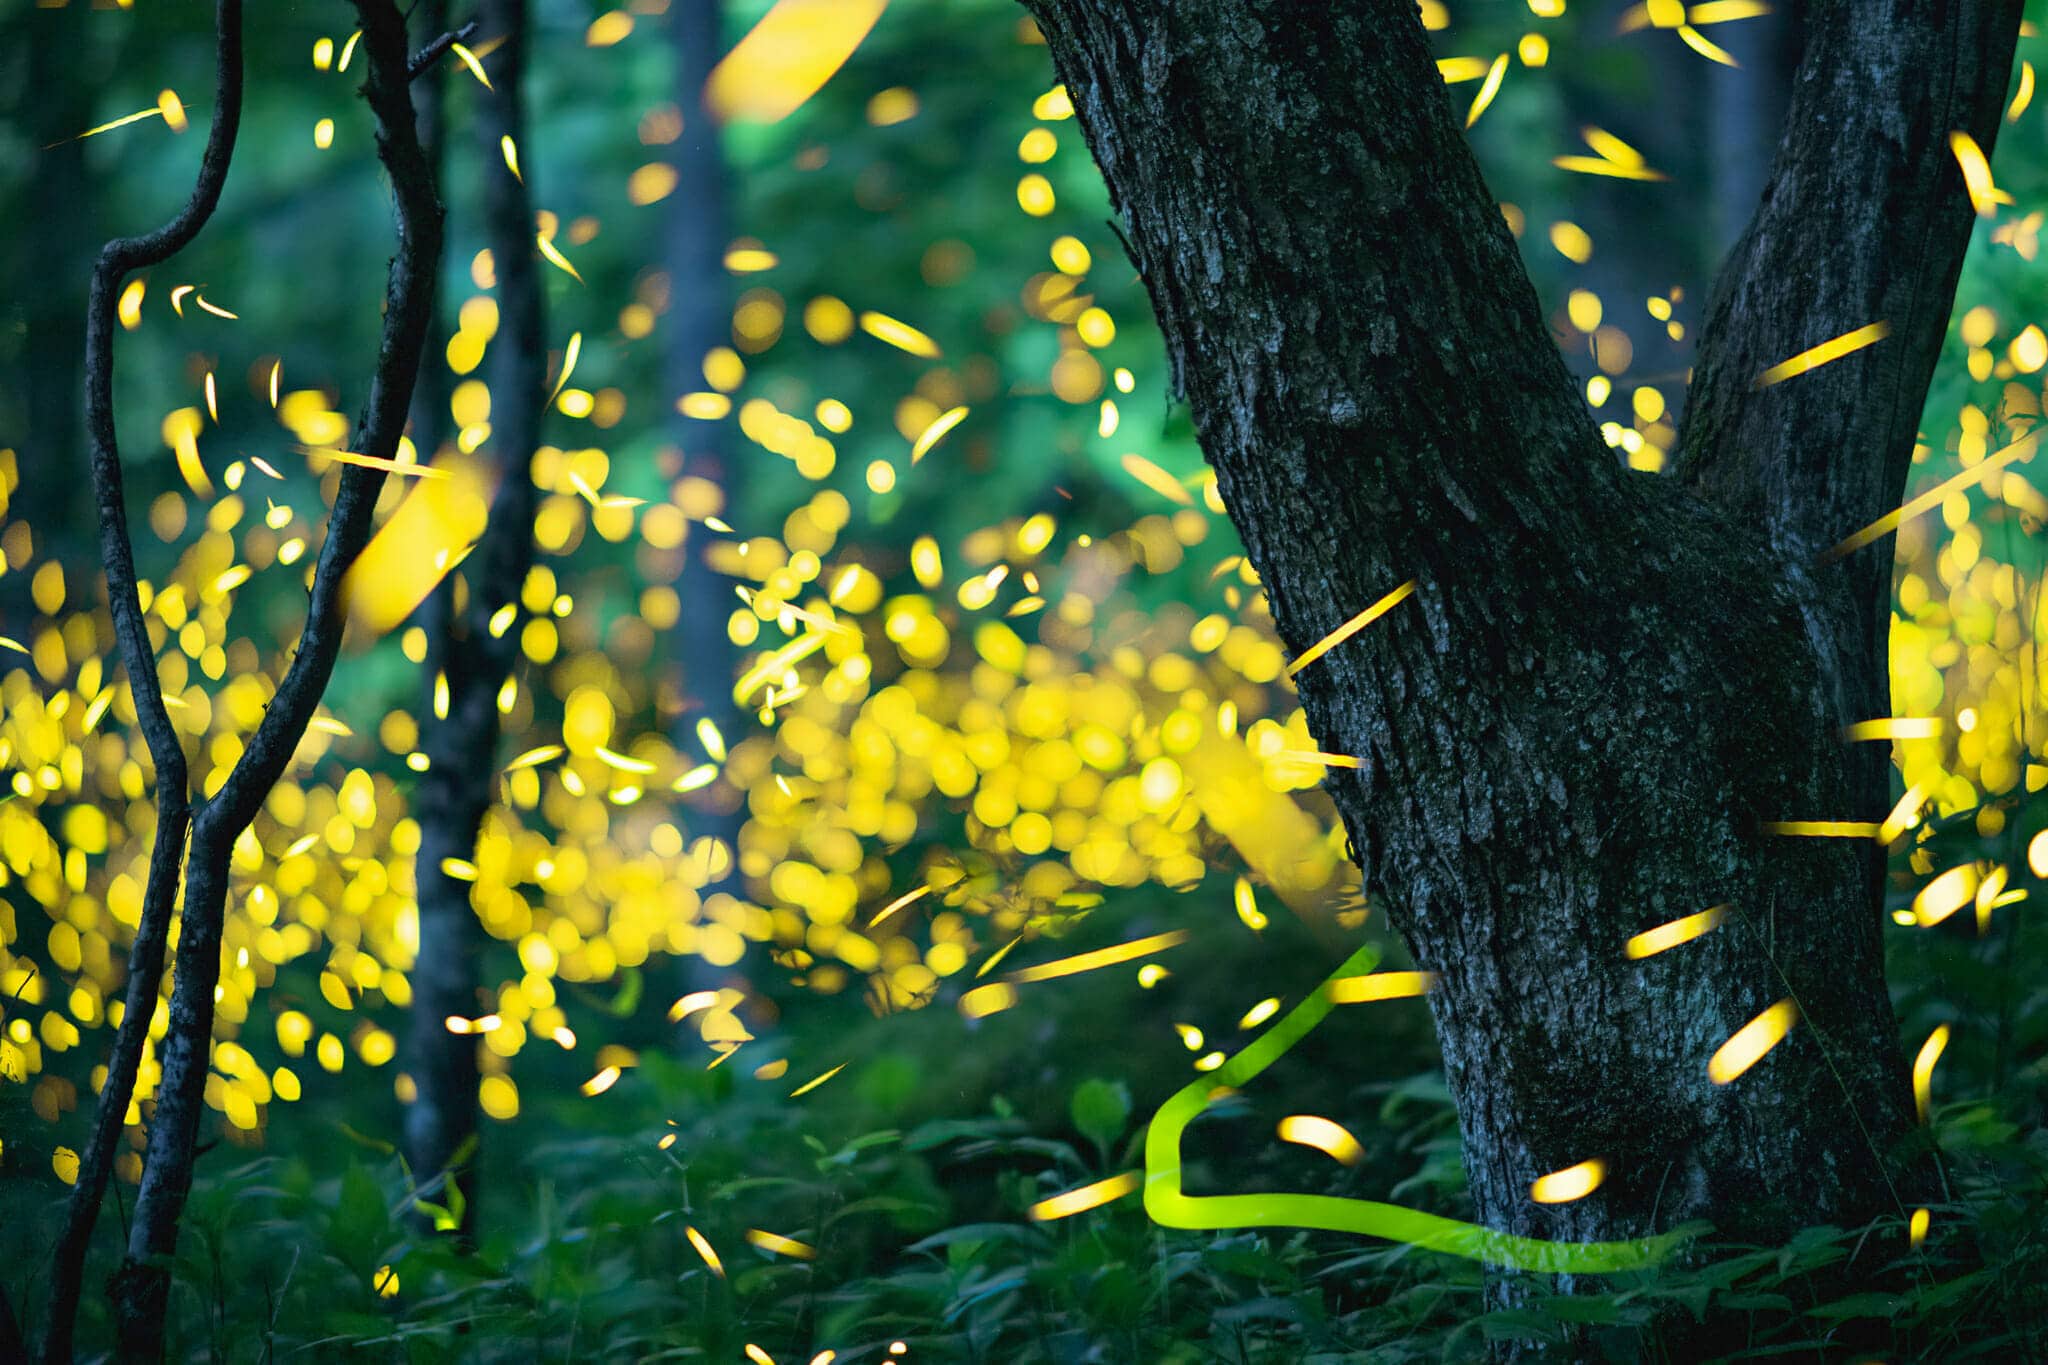 Fireflies in Great Smokey Mountains National Park